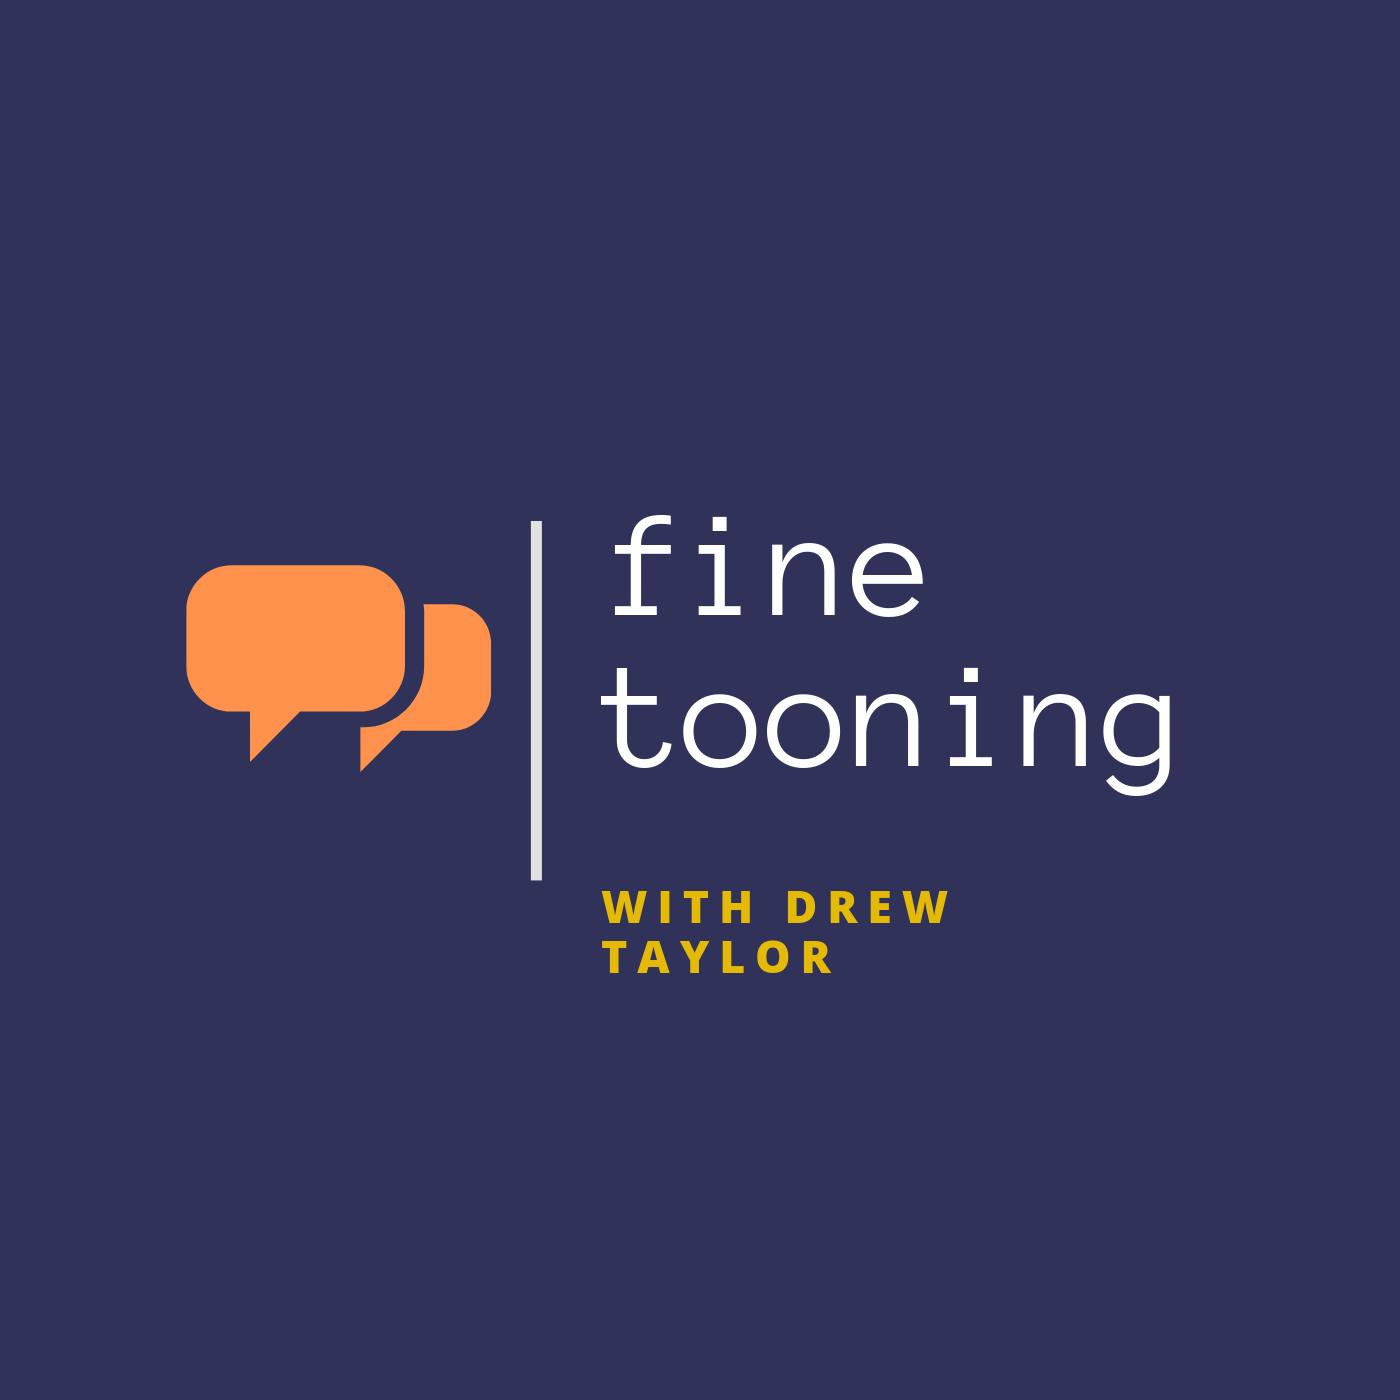 Fine Tooning with Drew Taylor - Episode 131: Meet the writers of “Trollhunters: Rise of the Titans”